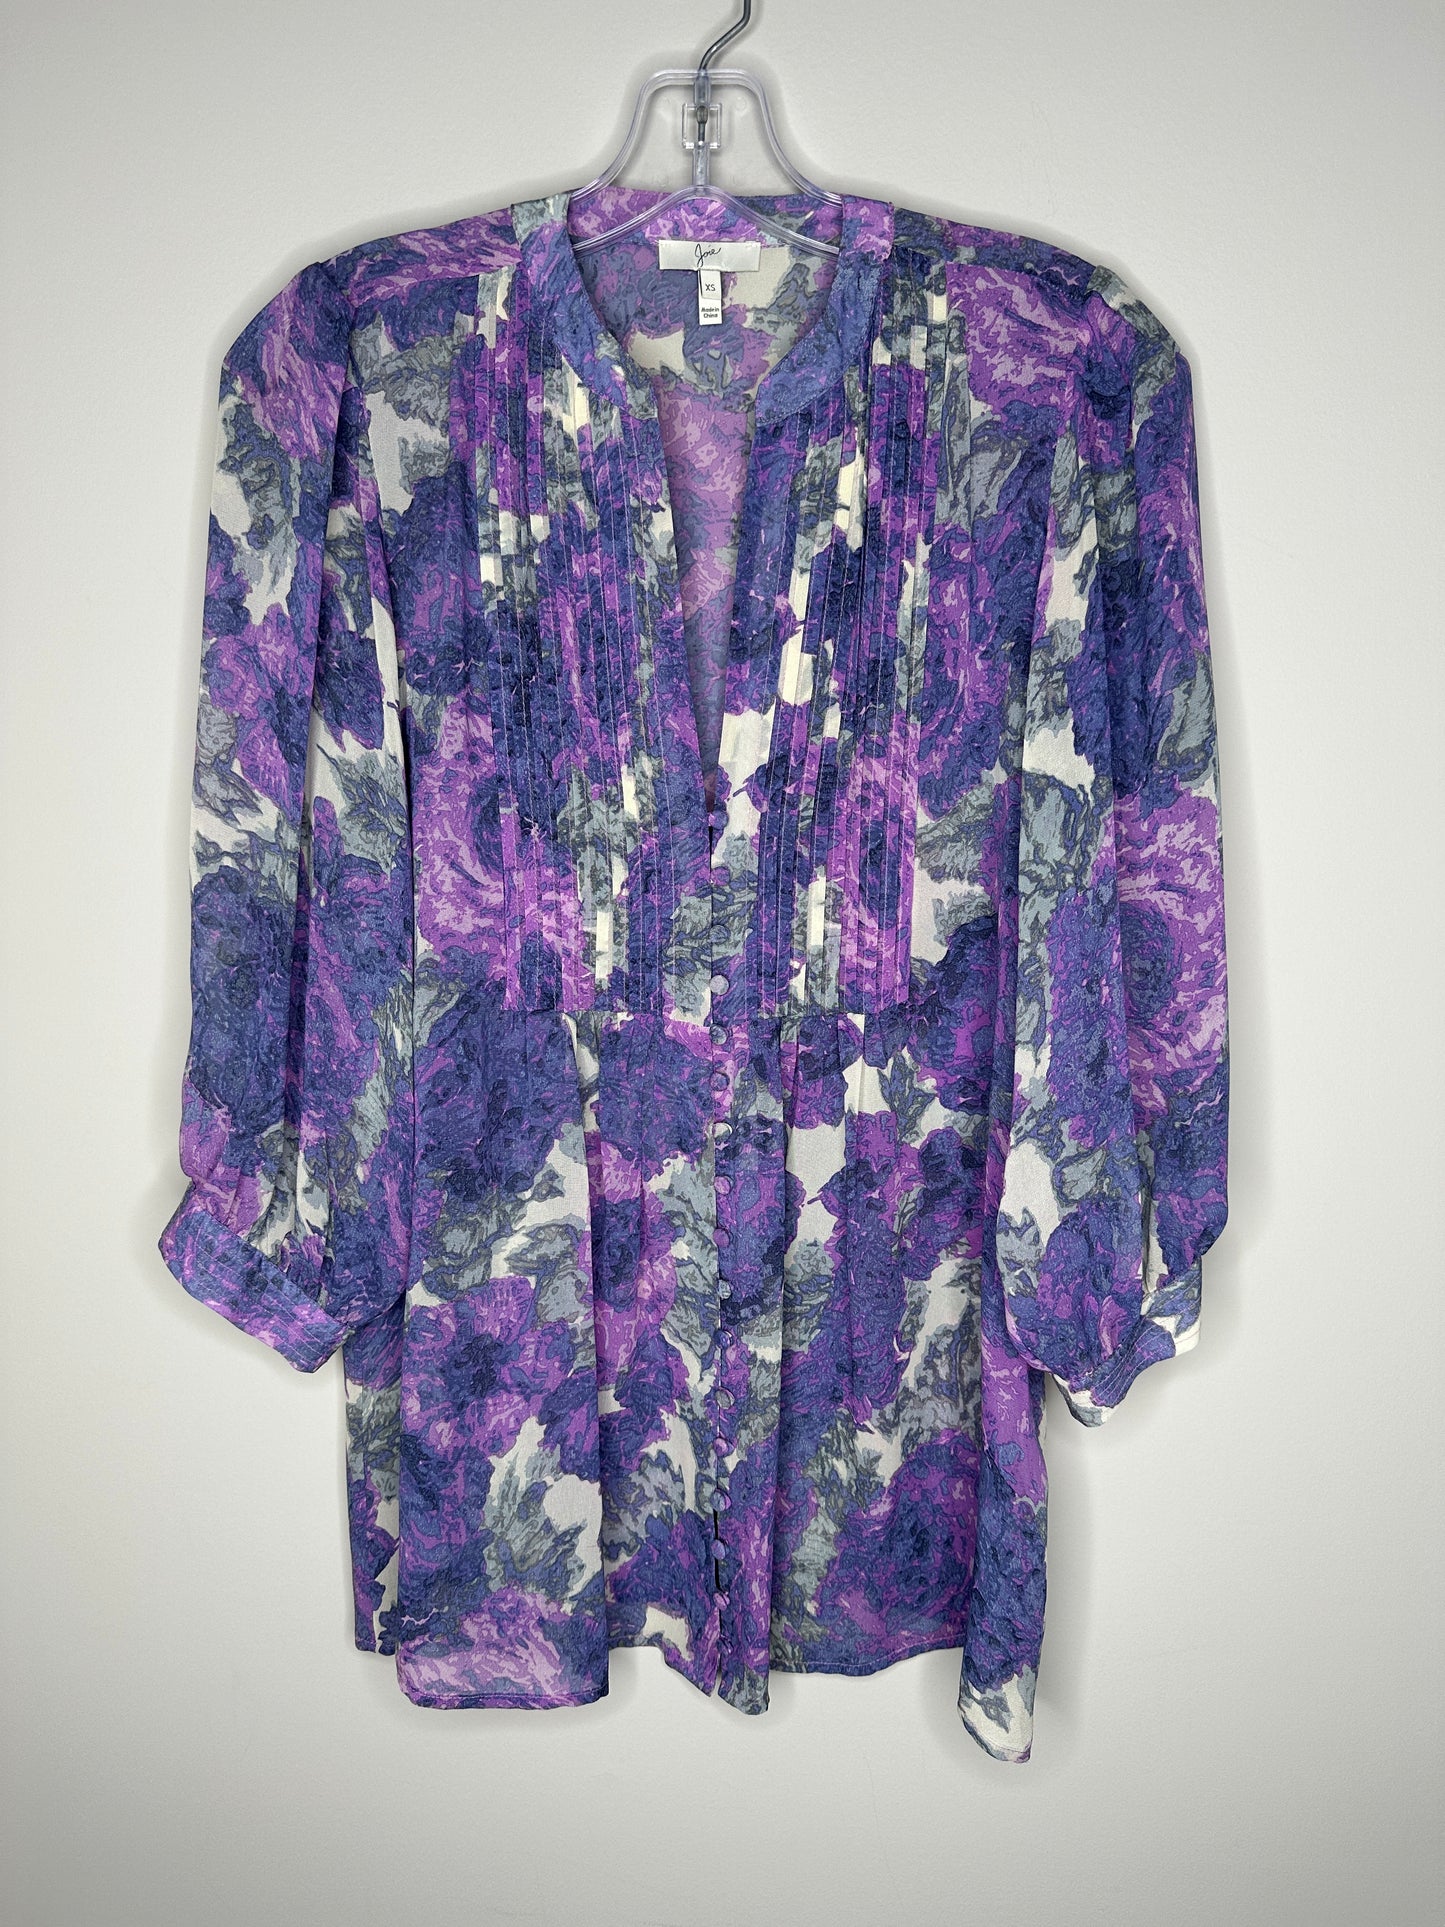 Joie Size XS Purple & Gray Floral 3/4 Sleeve Silk Blouse, EUC (runs large - please see meas.)